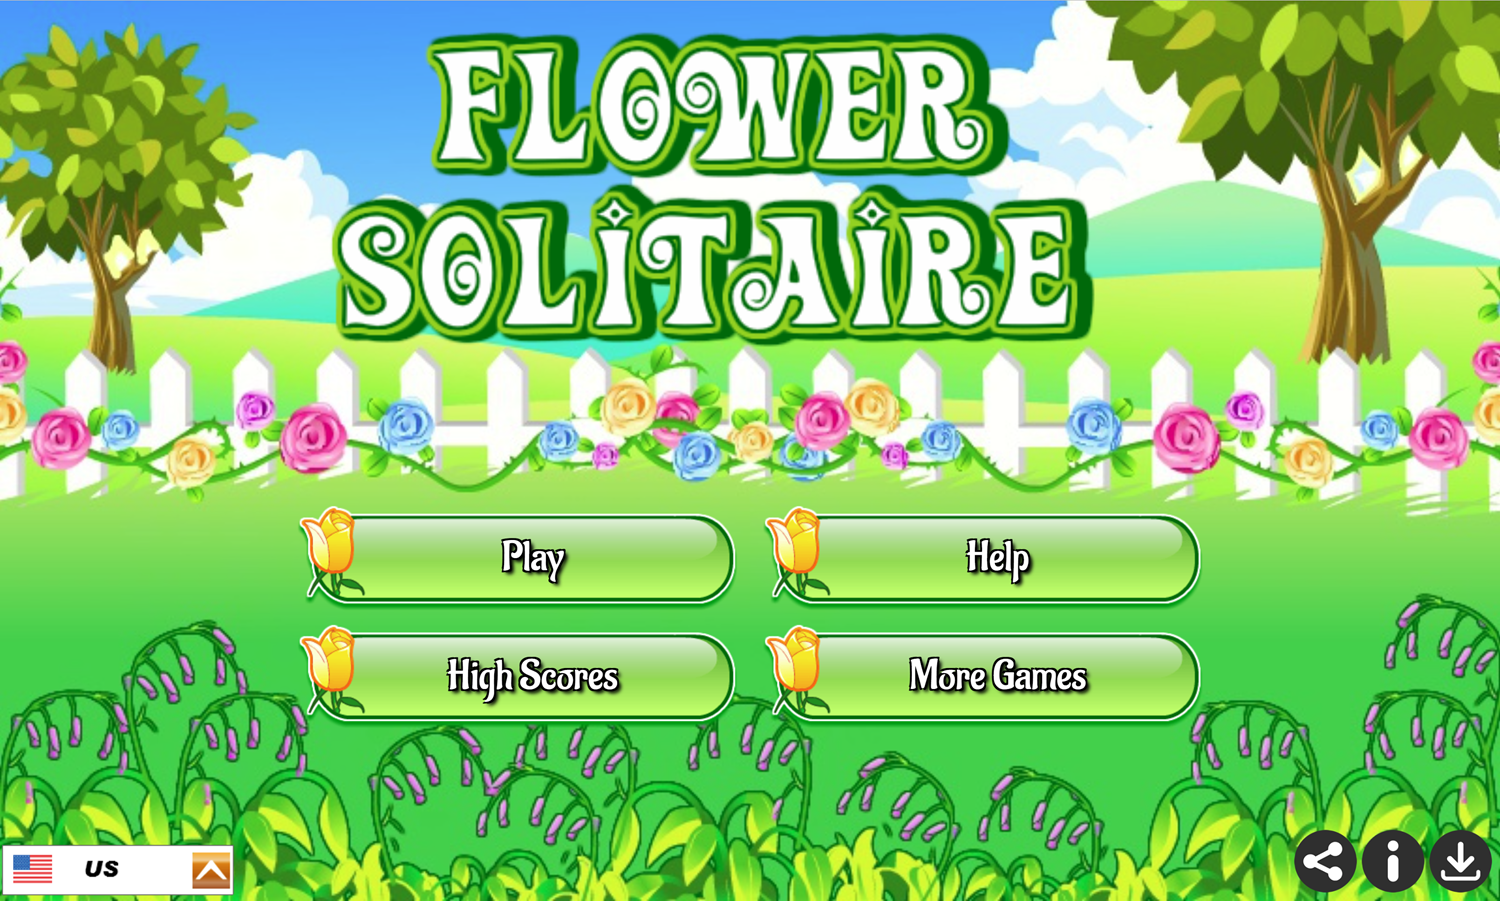 Flower Solitaire Game Welcome Screen Screenshot.